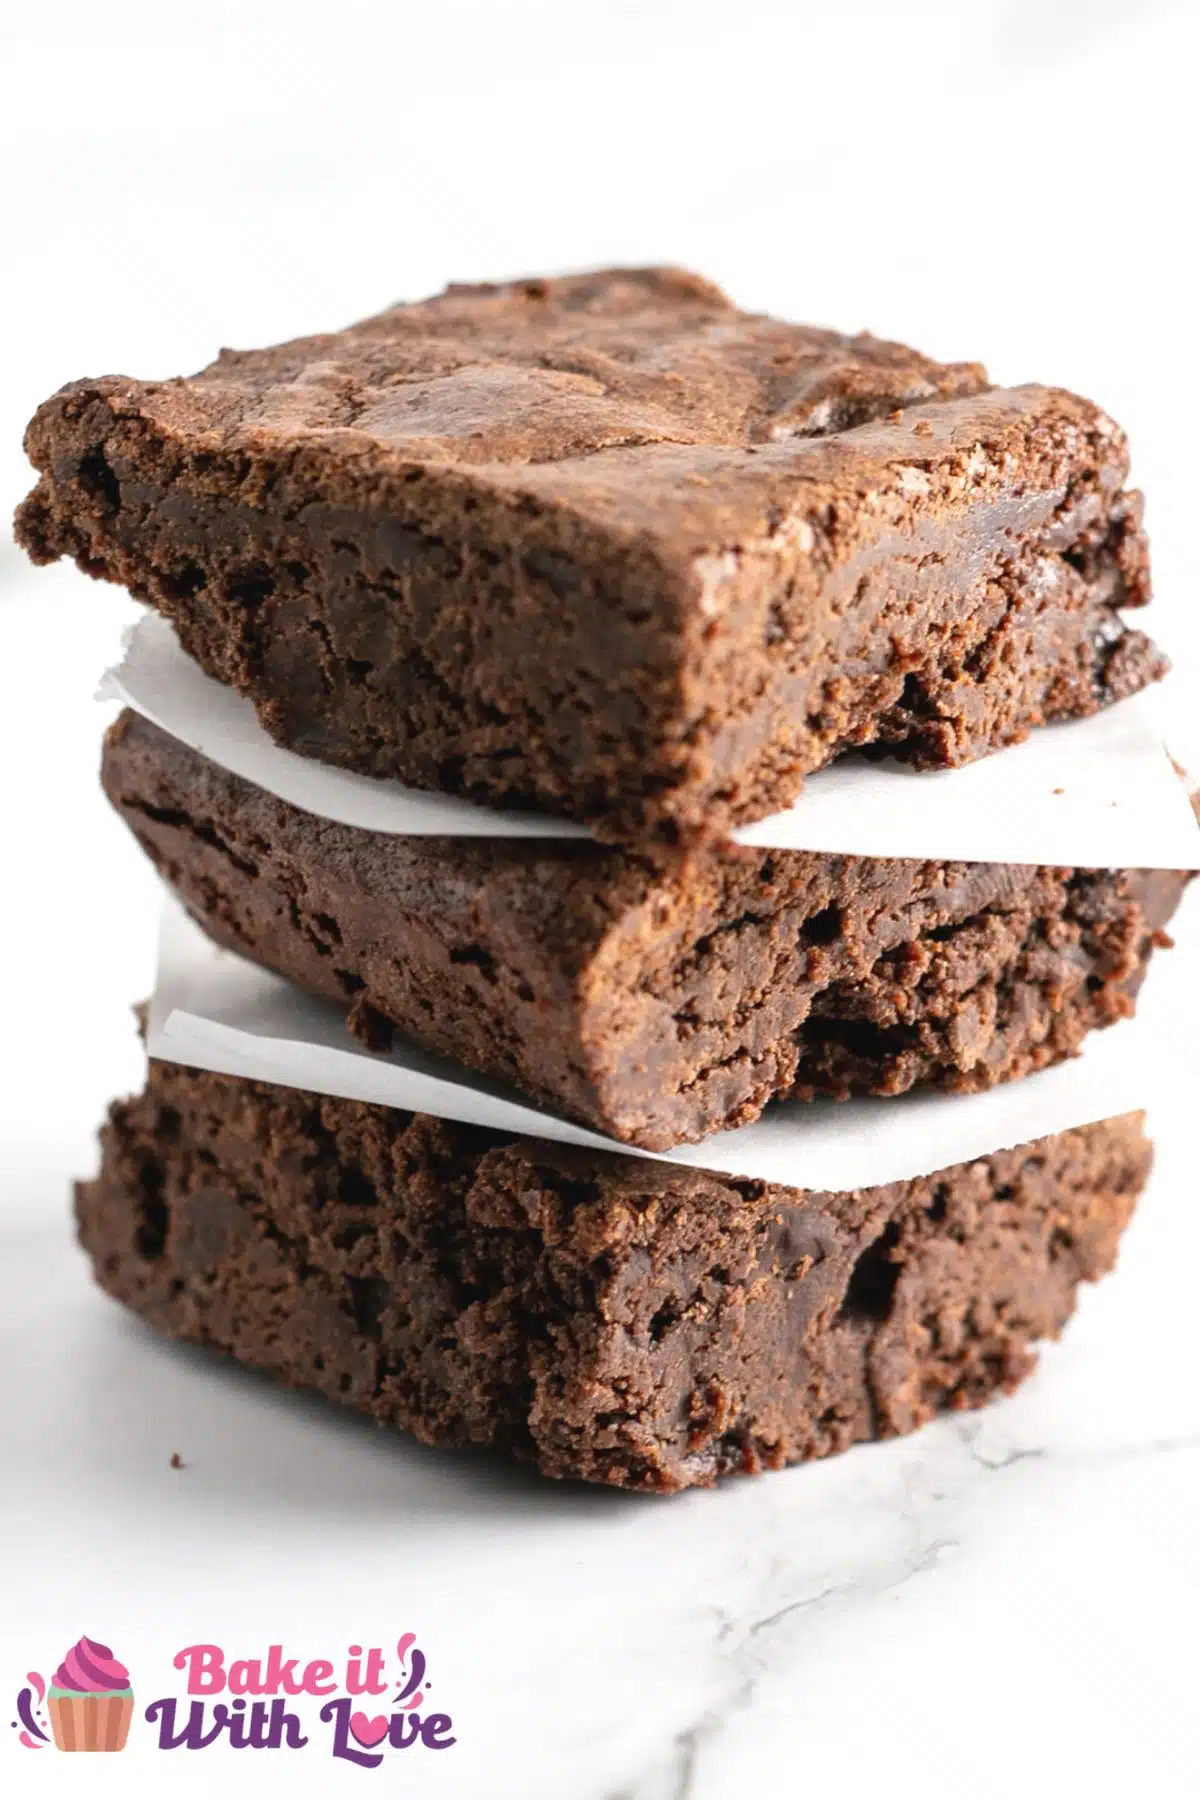 Tall image showing a plate of fudge brownies.